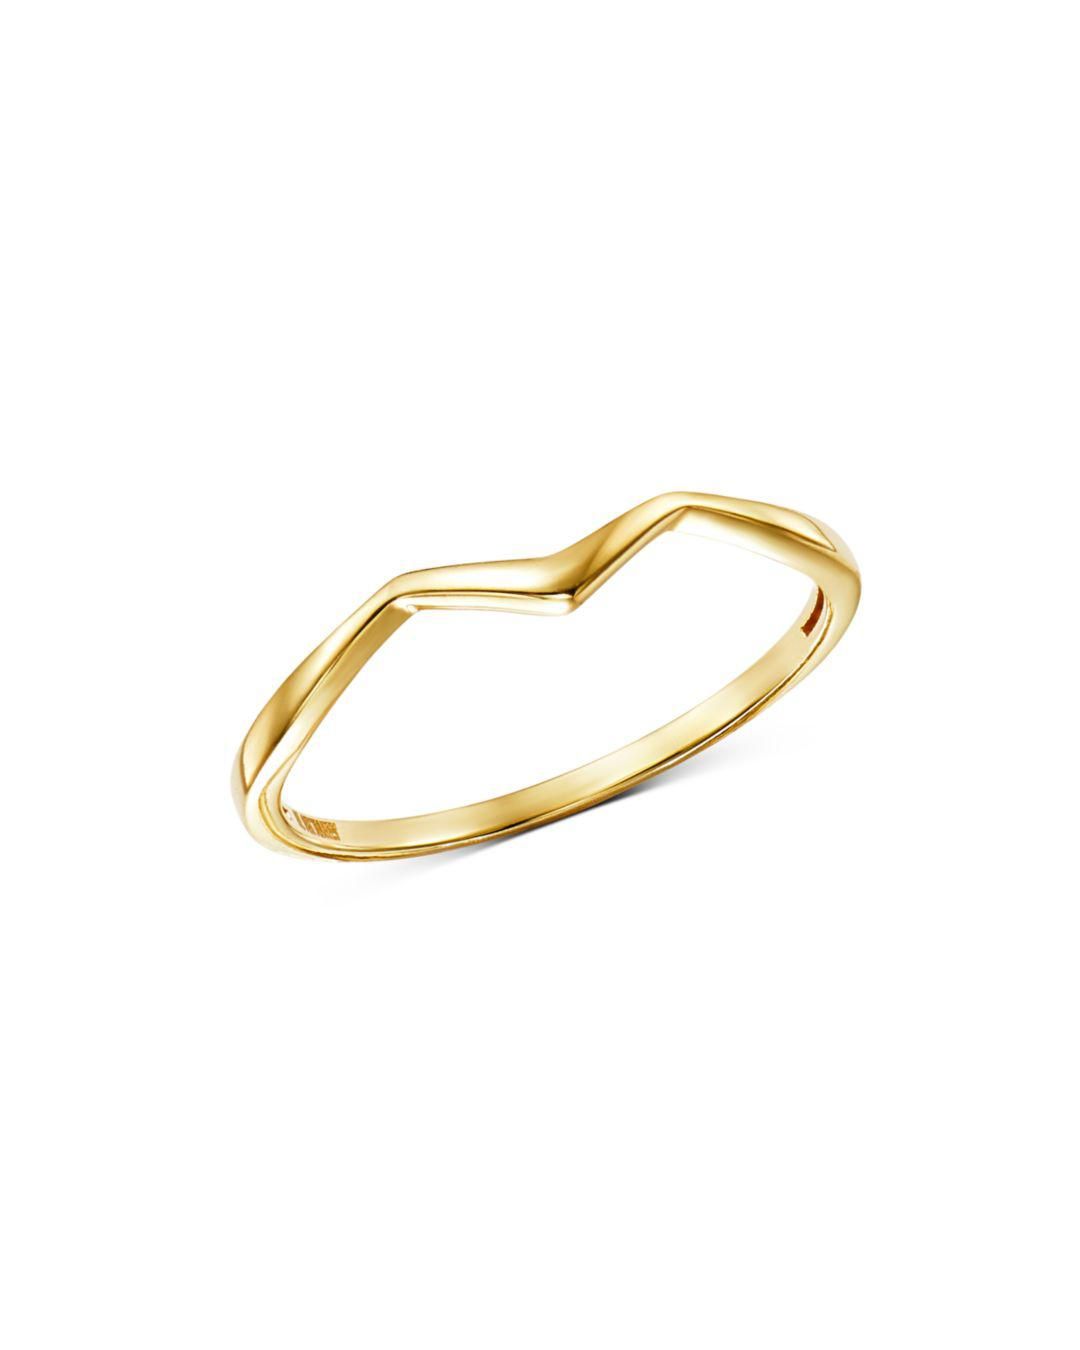 Lyst – Moon & Meadow Polished Zigzag Ring In 14k Yellow Gold In Metallic Within Most Recently Released Polished Zigzag Rings (View 1 of 25)